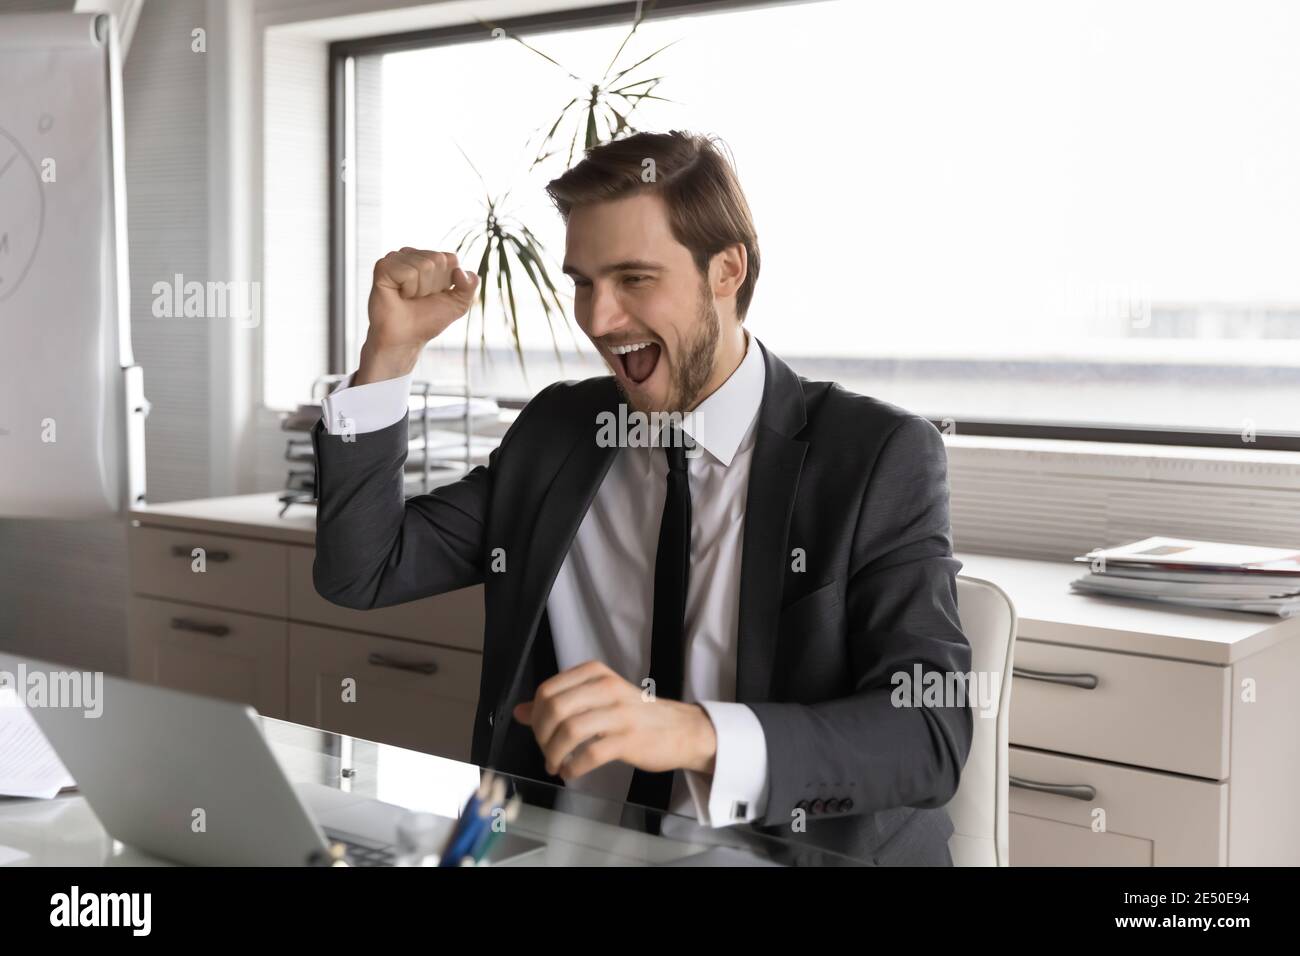 Overjoyed businessman wearing suit looking at laptop screen, reading news Stock Photo